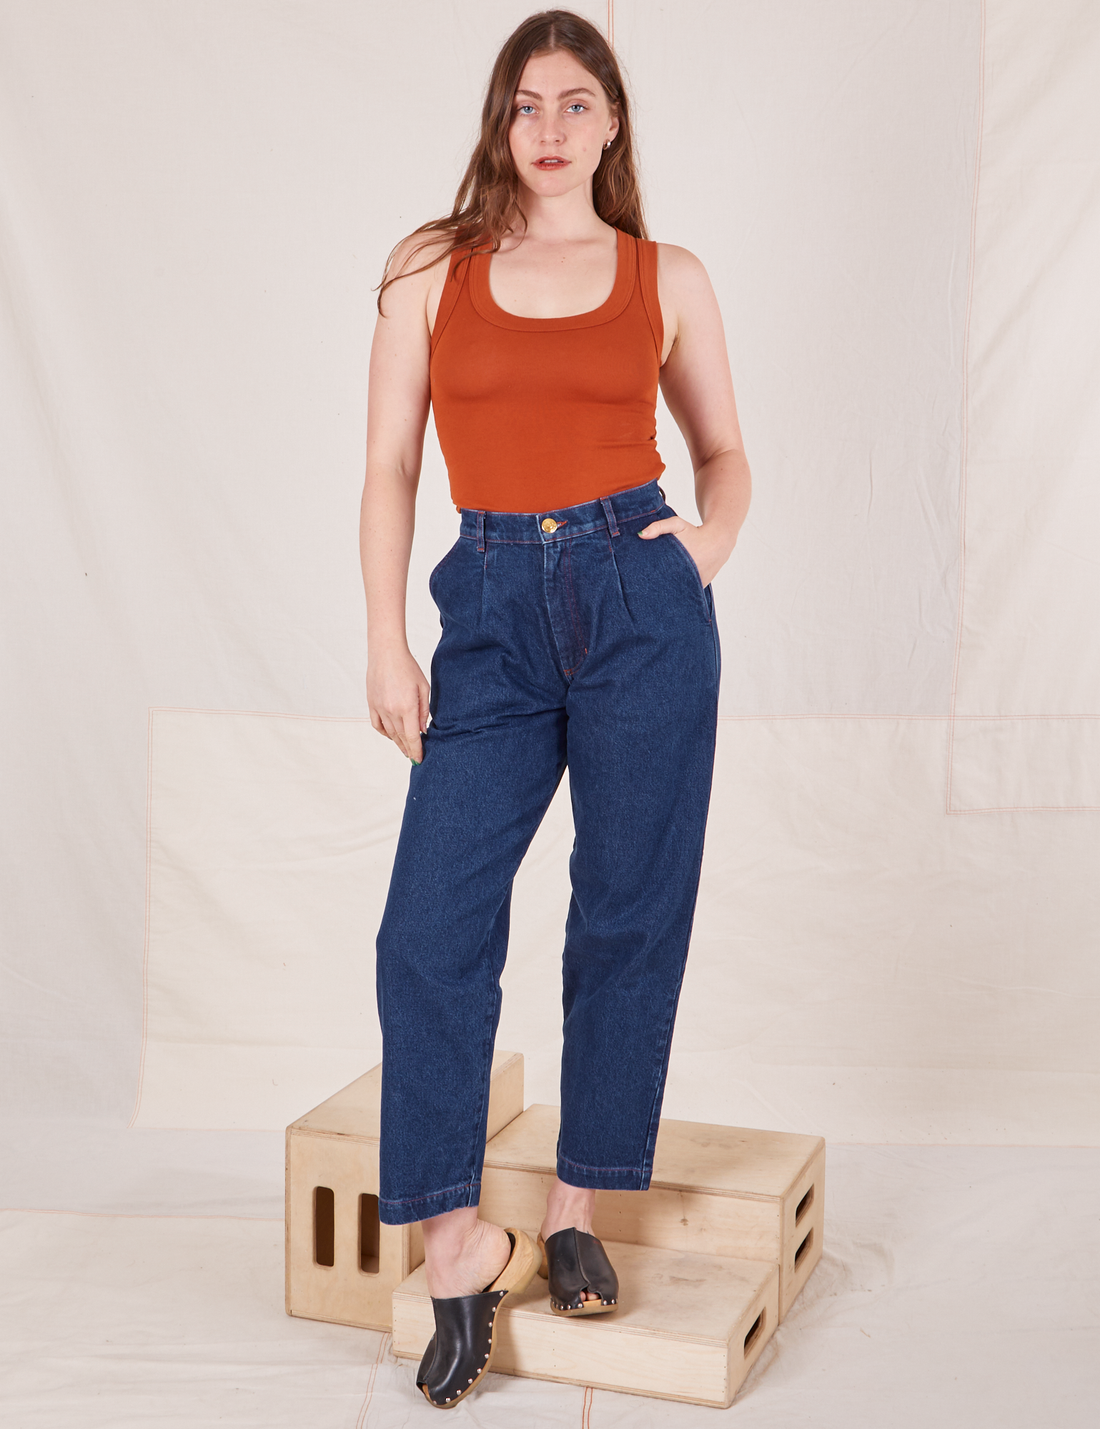 Allison is 5'10" and wearing XS Denim Trouser Jeans in Dark Wash paired with burnt orange Tank Top